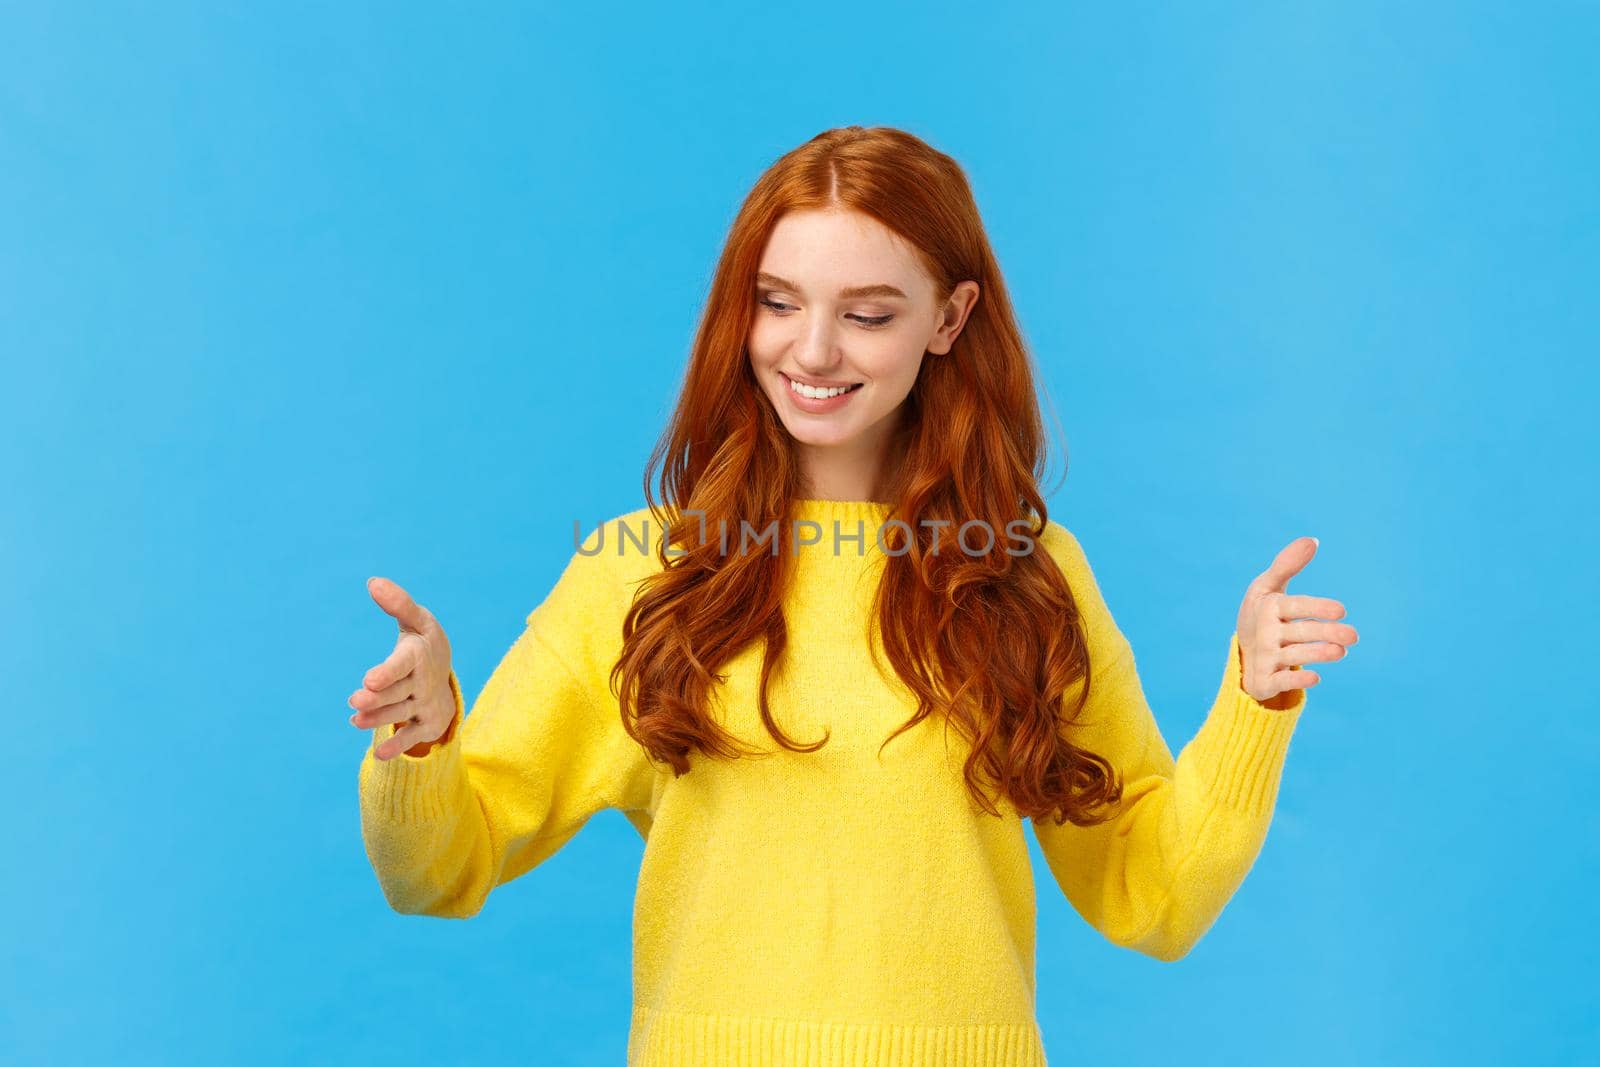 Happy good-looking young woman with red curly hair, freckles, shaping long object as if holding box over chest, looking satisfied, pleased with size, explain how big was gift, blue background.